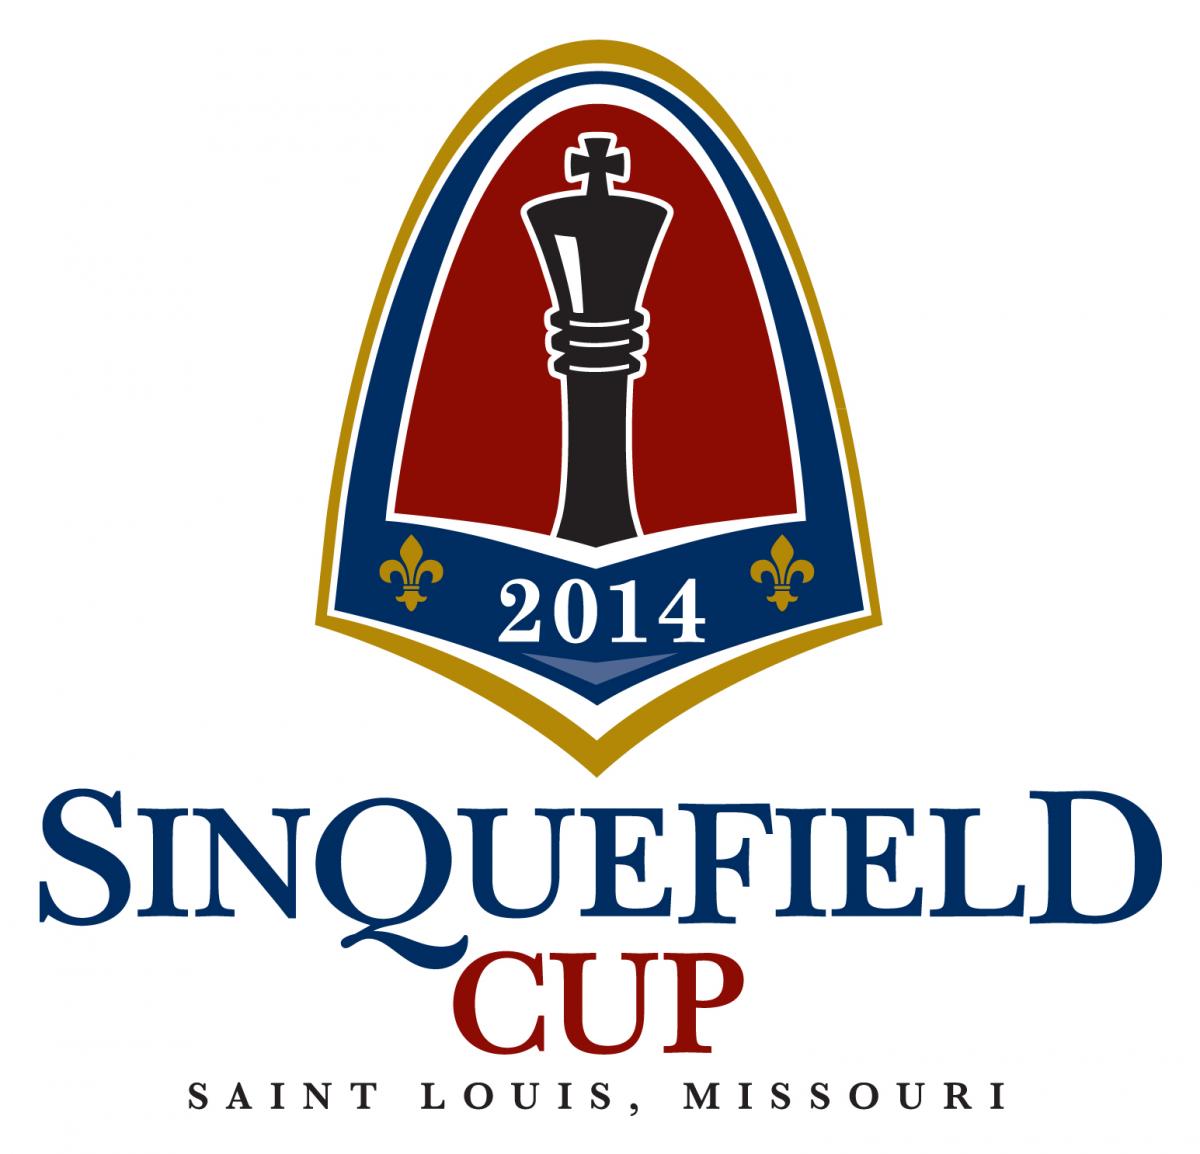 The 2014 Sinquefield Cup